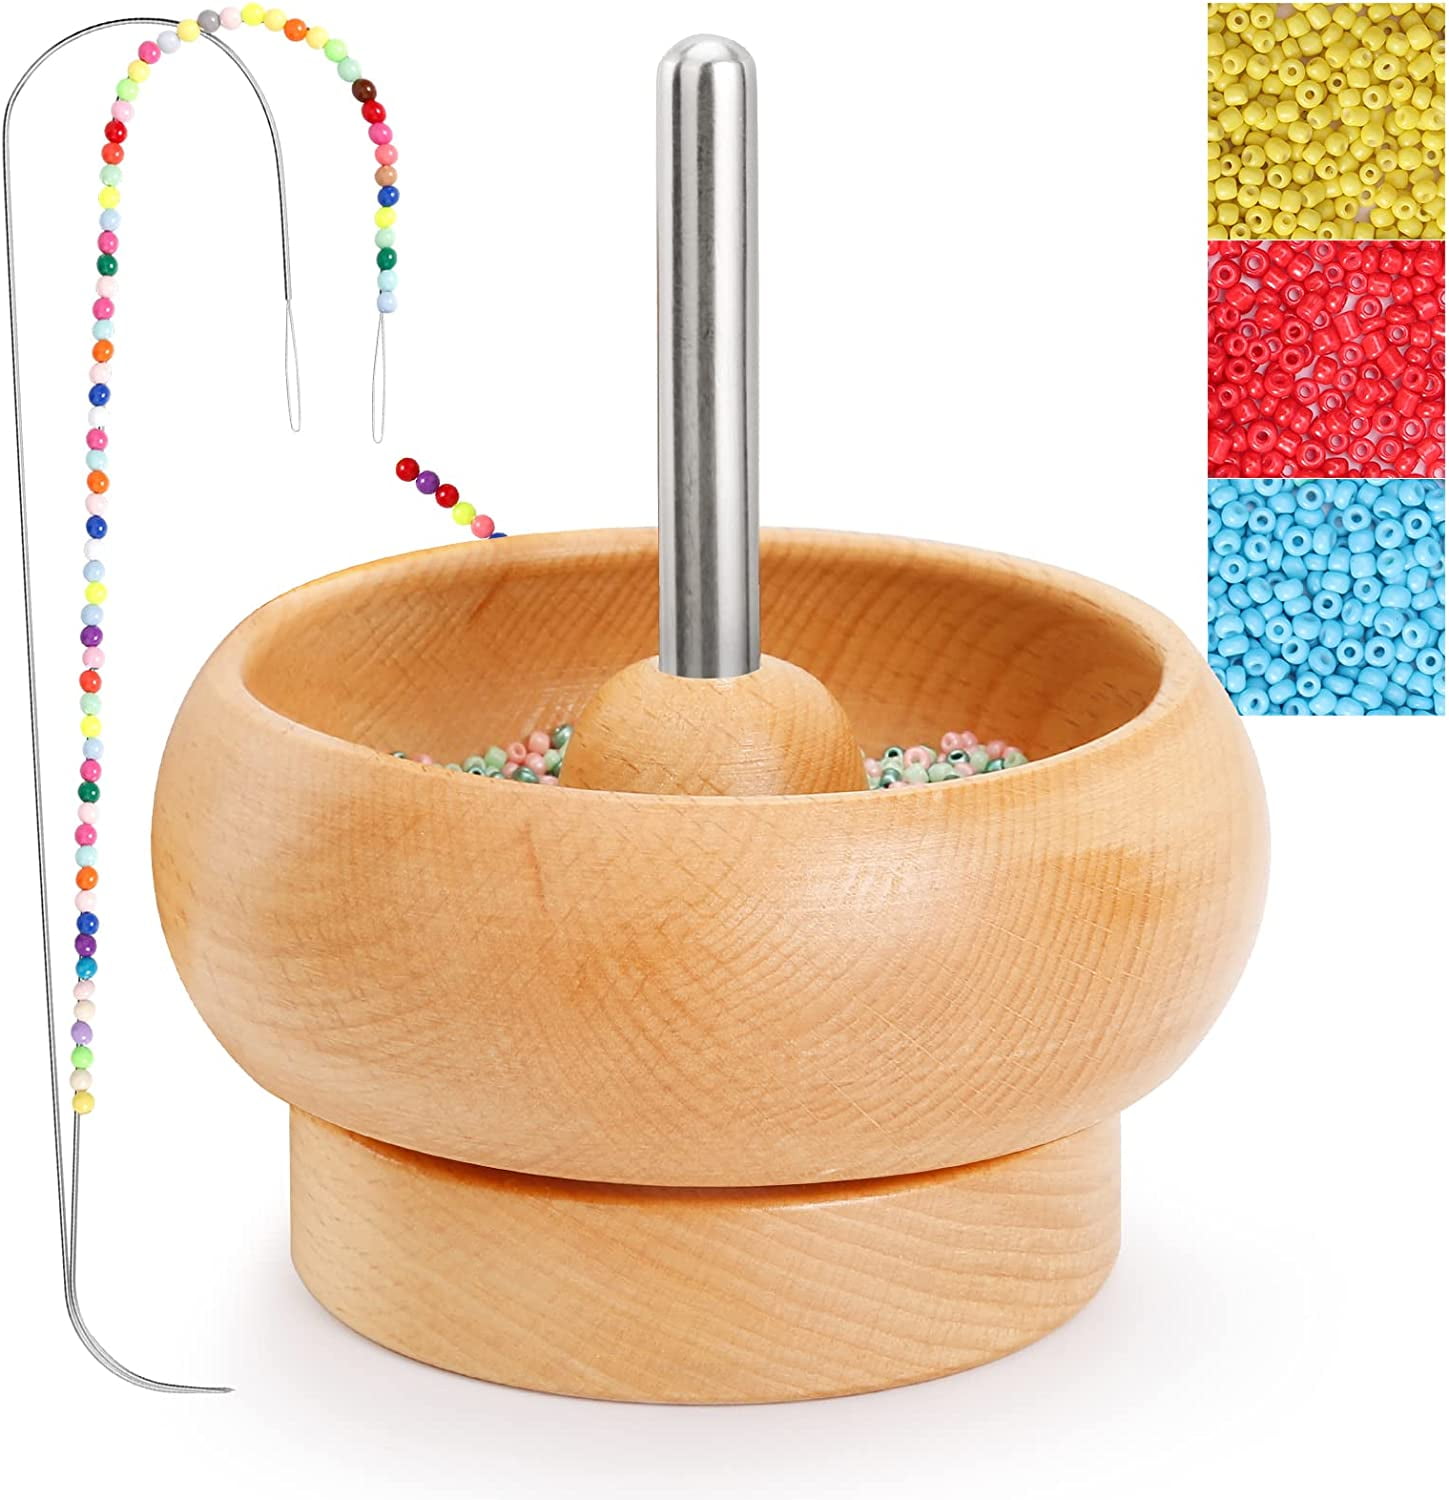 Bead Spinner Set with 2 Needles Labor Saving Bowl Bead Spinner Easy to Operate Reusable Wooden Bead Spinner Spin Beading Bowl with Beading Thread